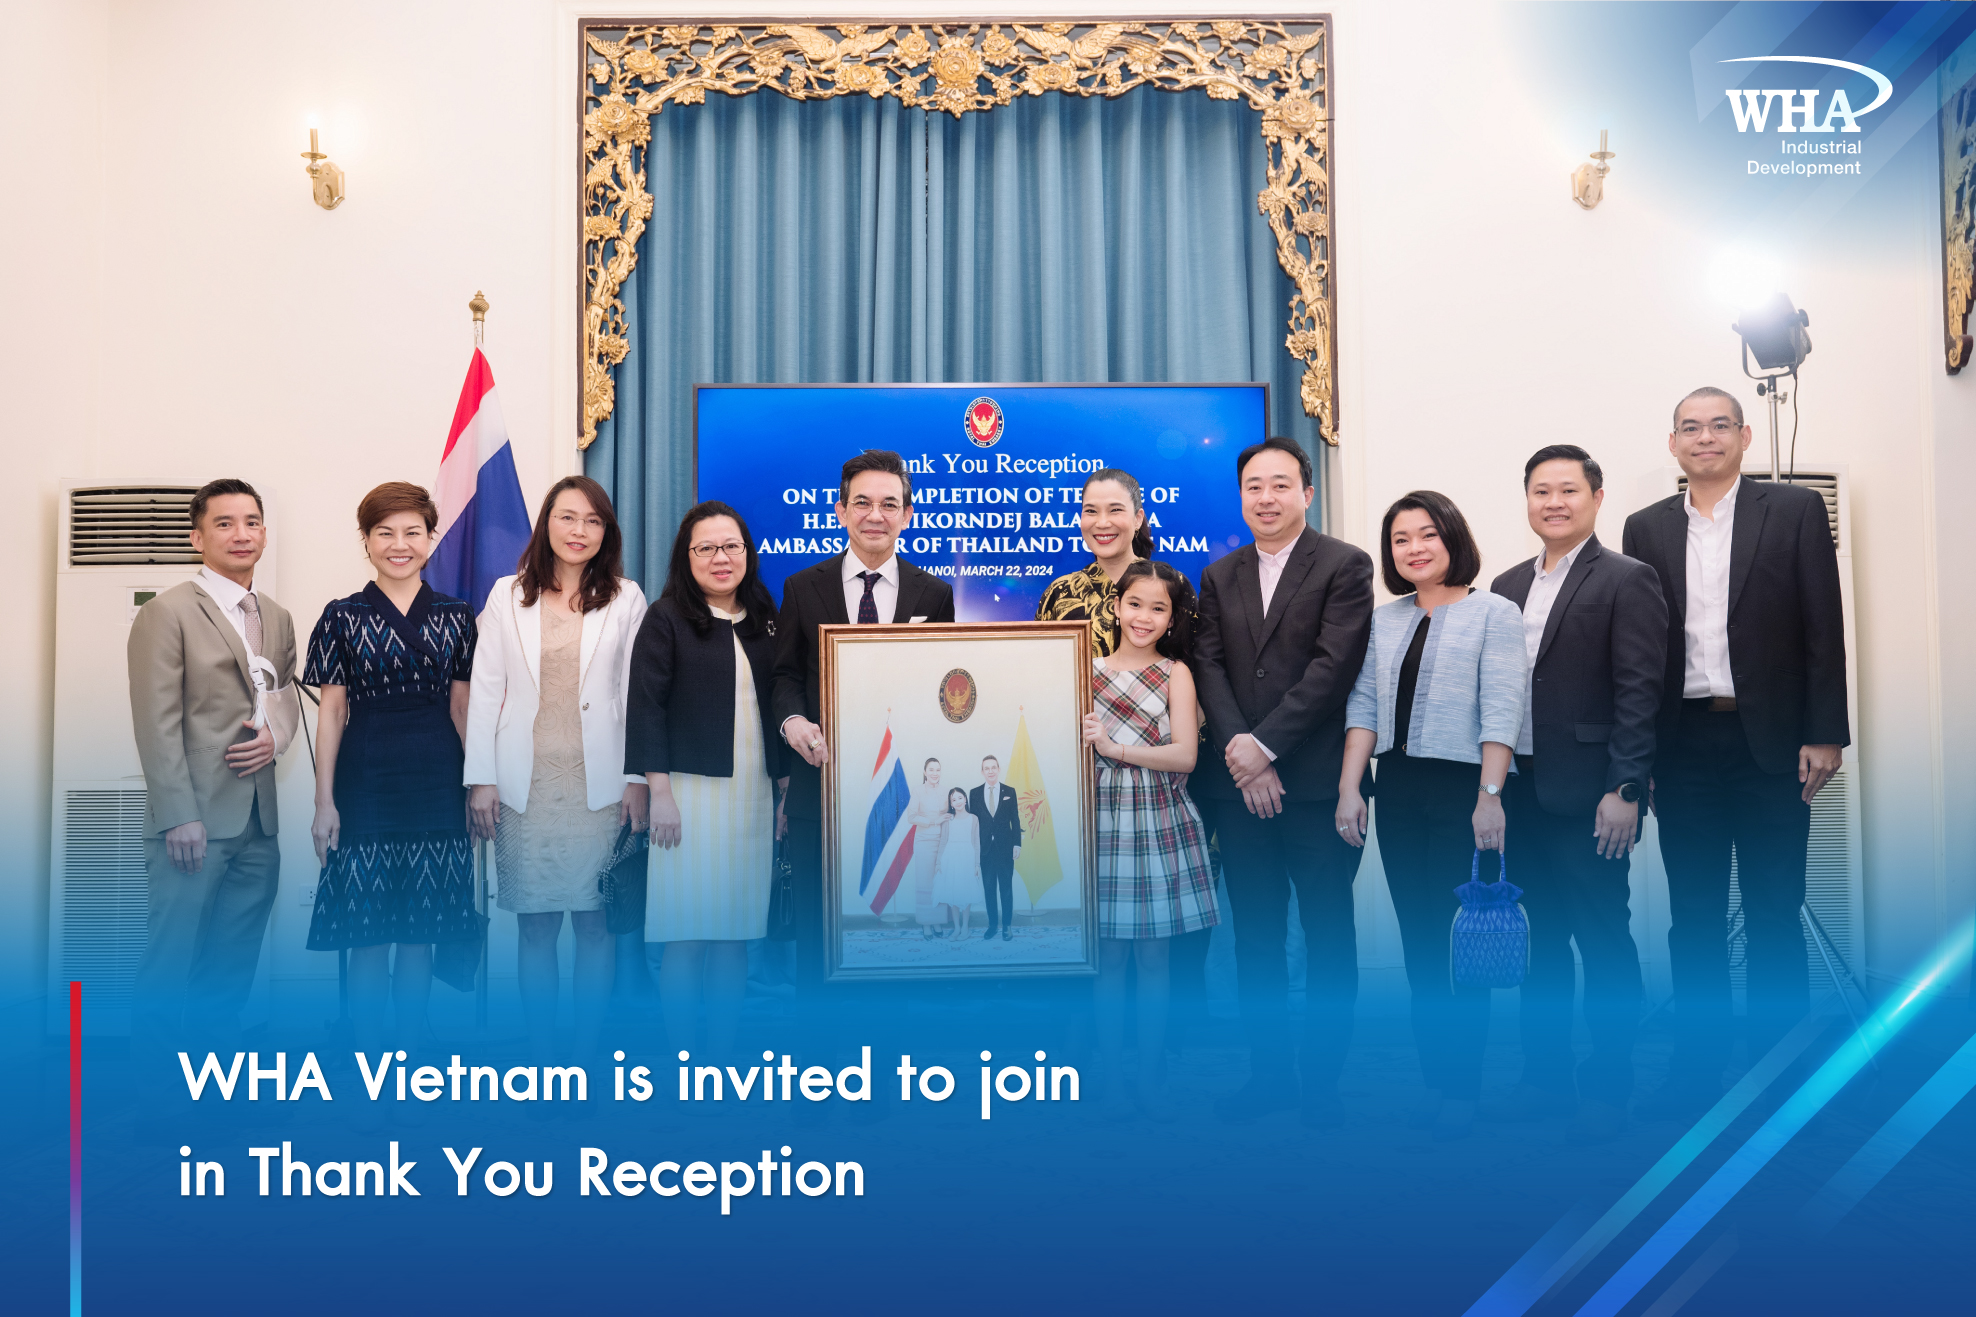 WHA Vietnam is invited to join in Thank You Reception